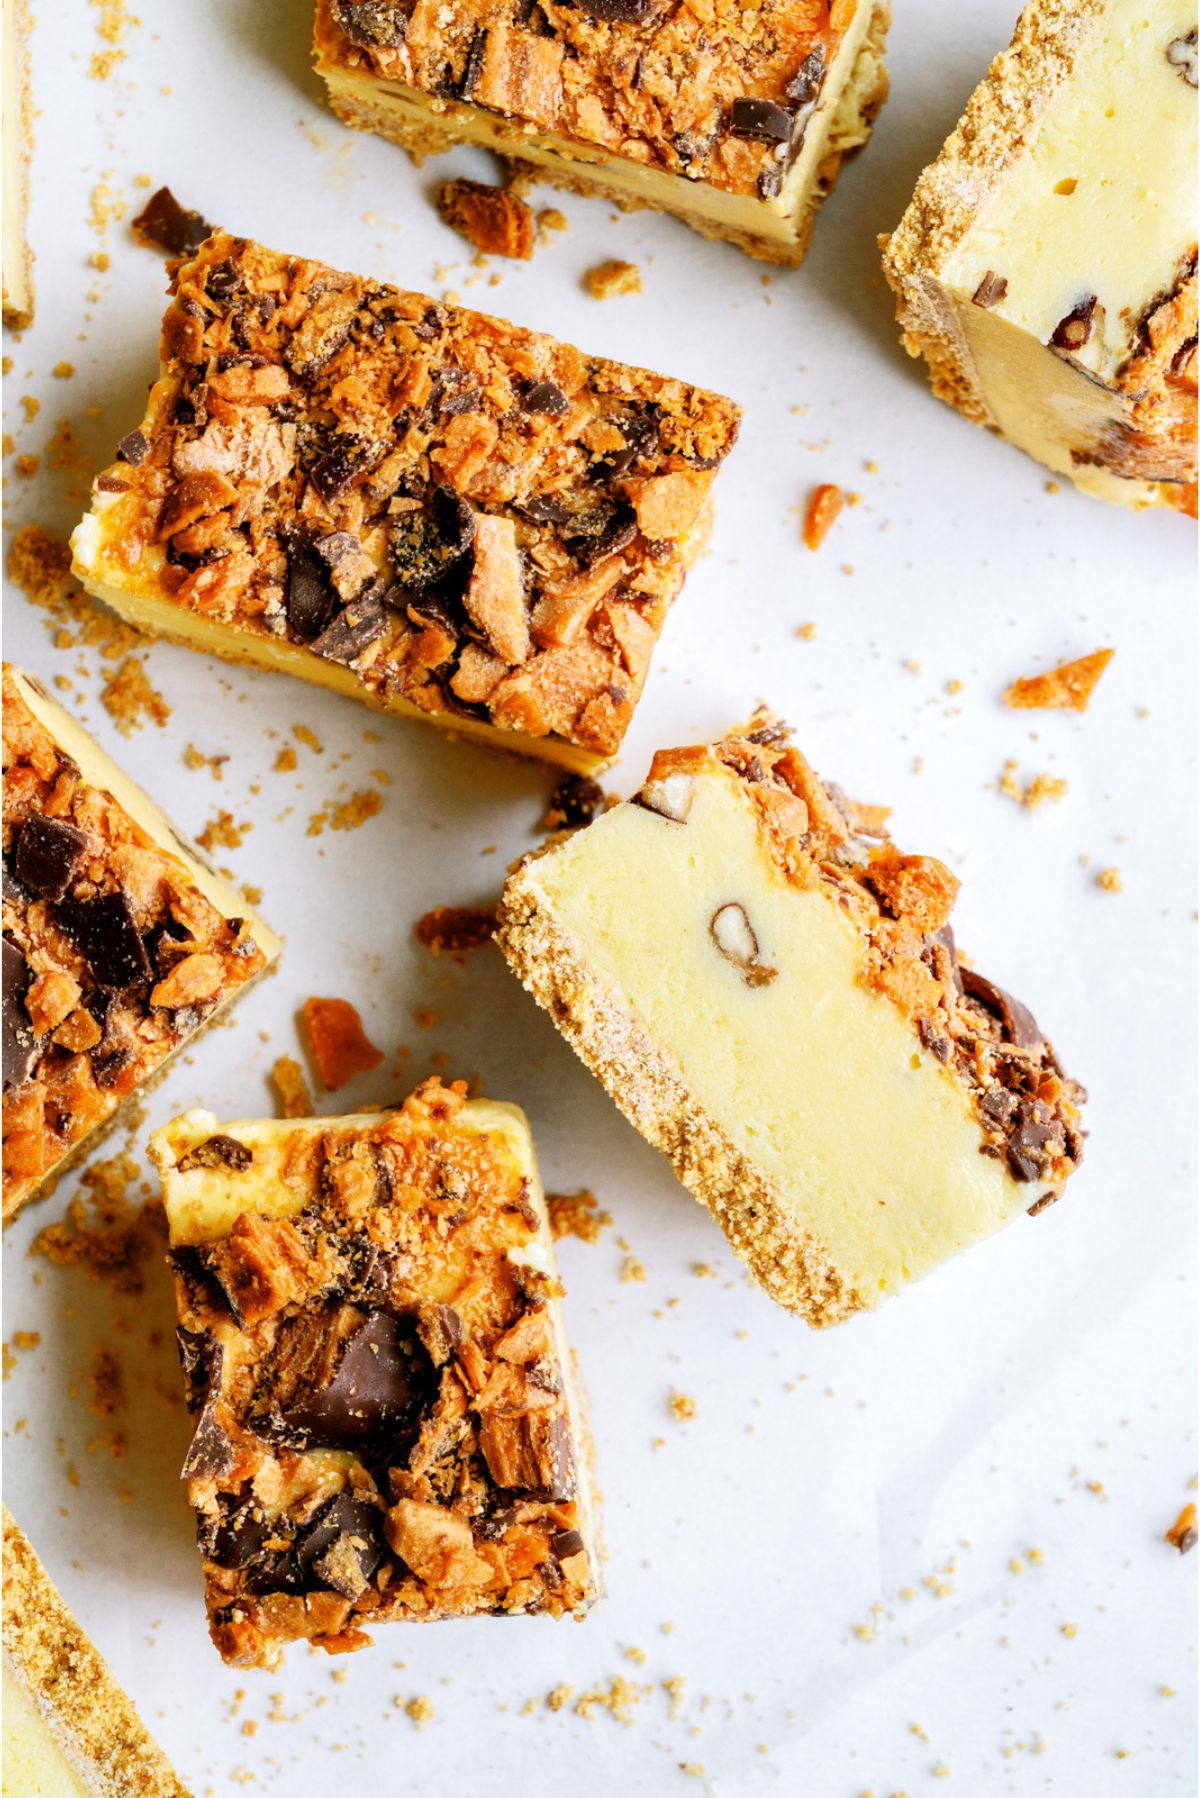 Butterfinger Ice Cream Bars cut into squares